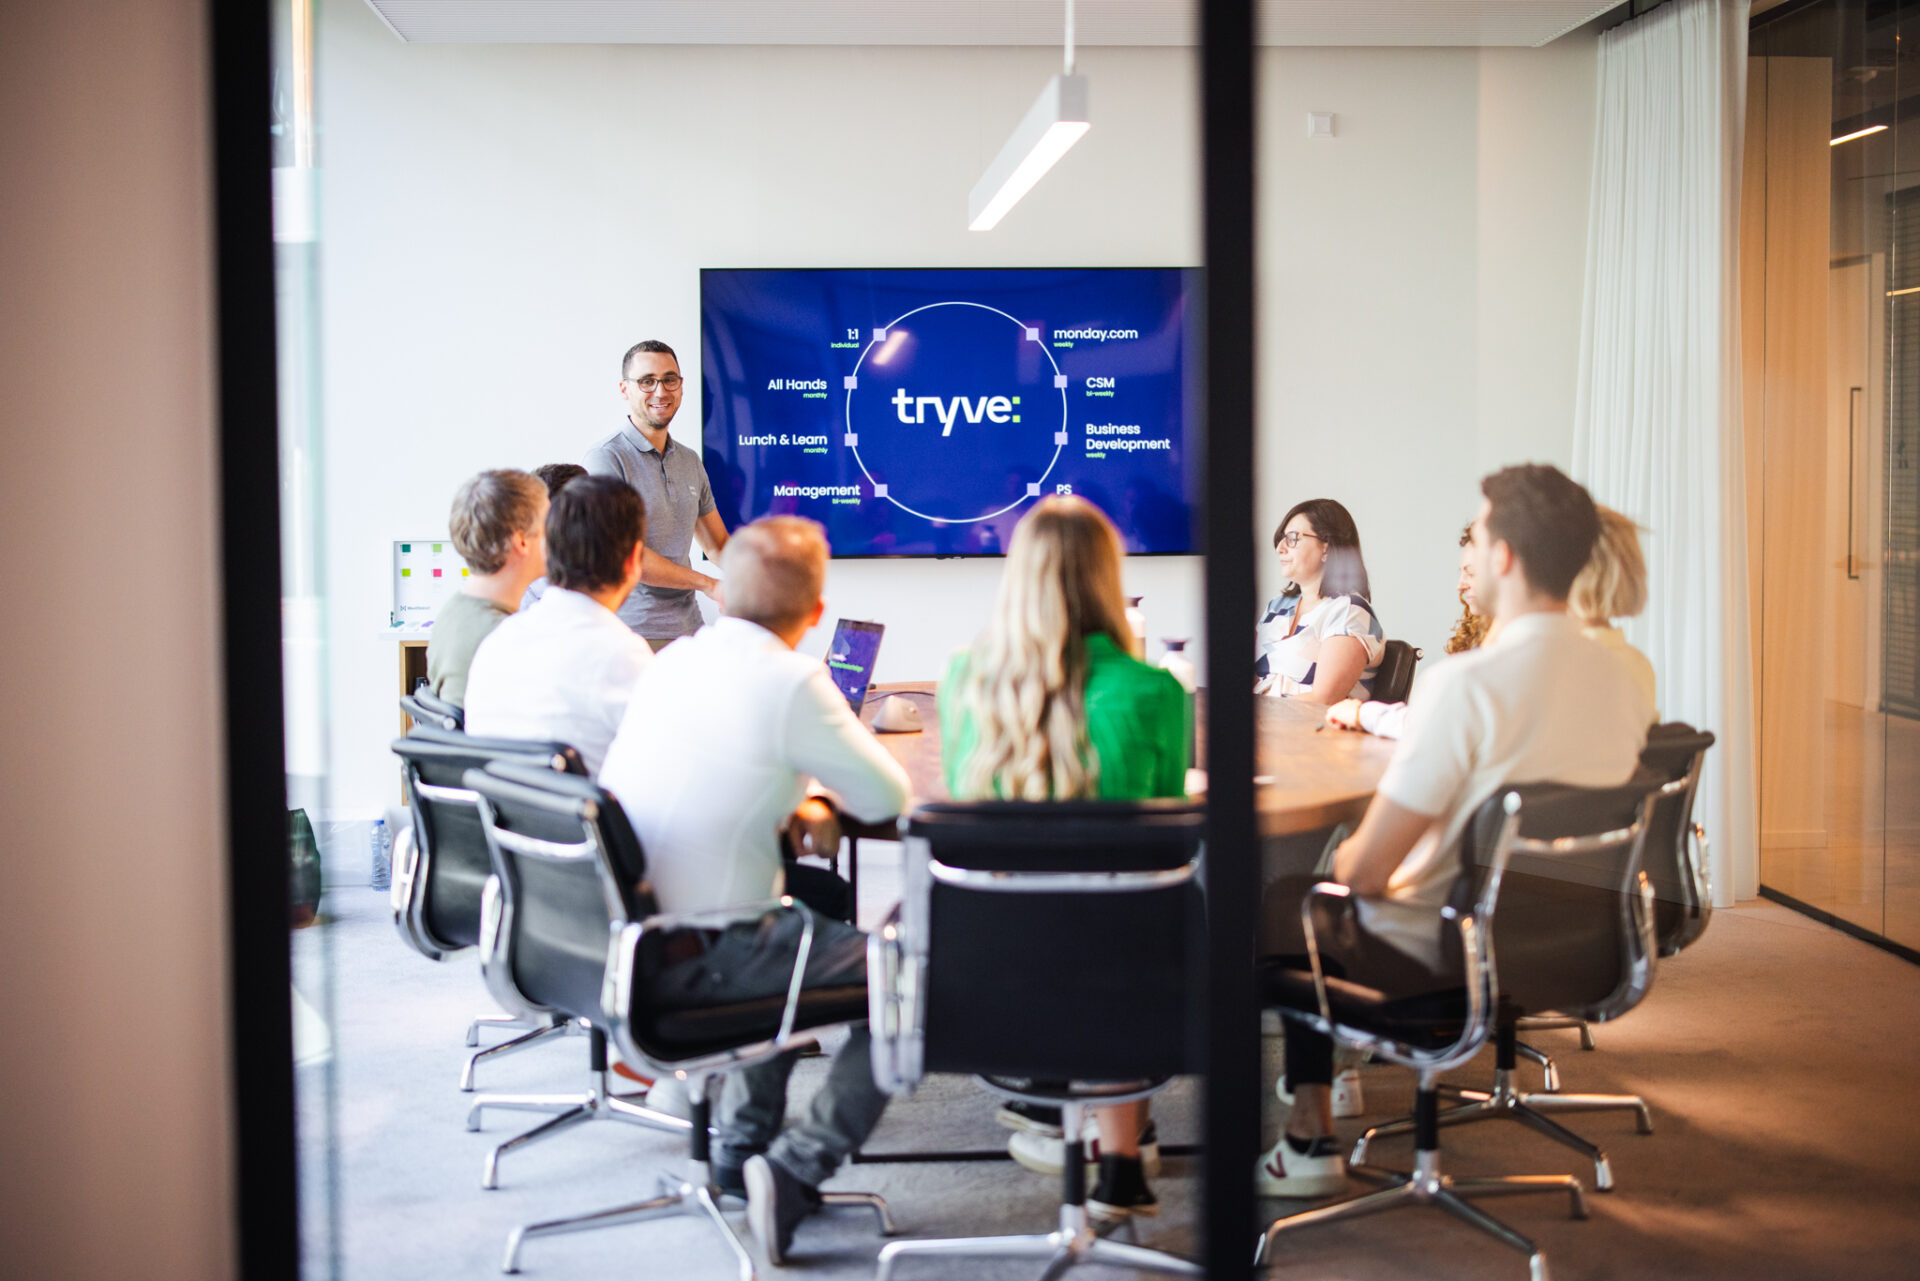 Tryve transforms ACME Corporation with customized monday.com solutions